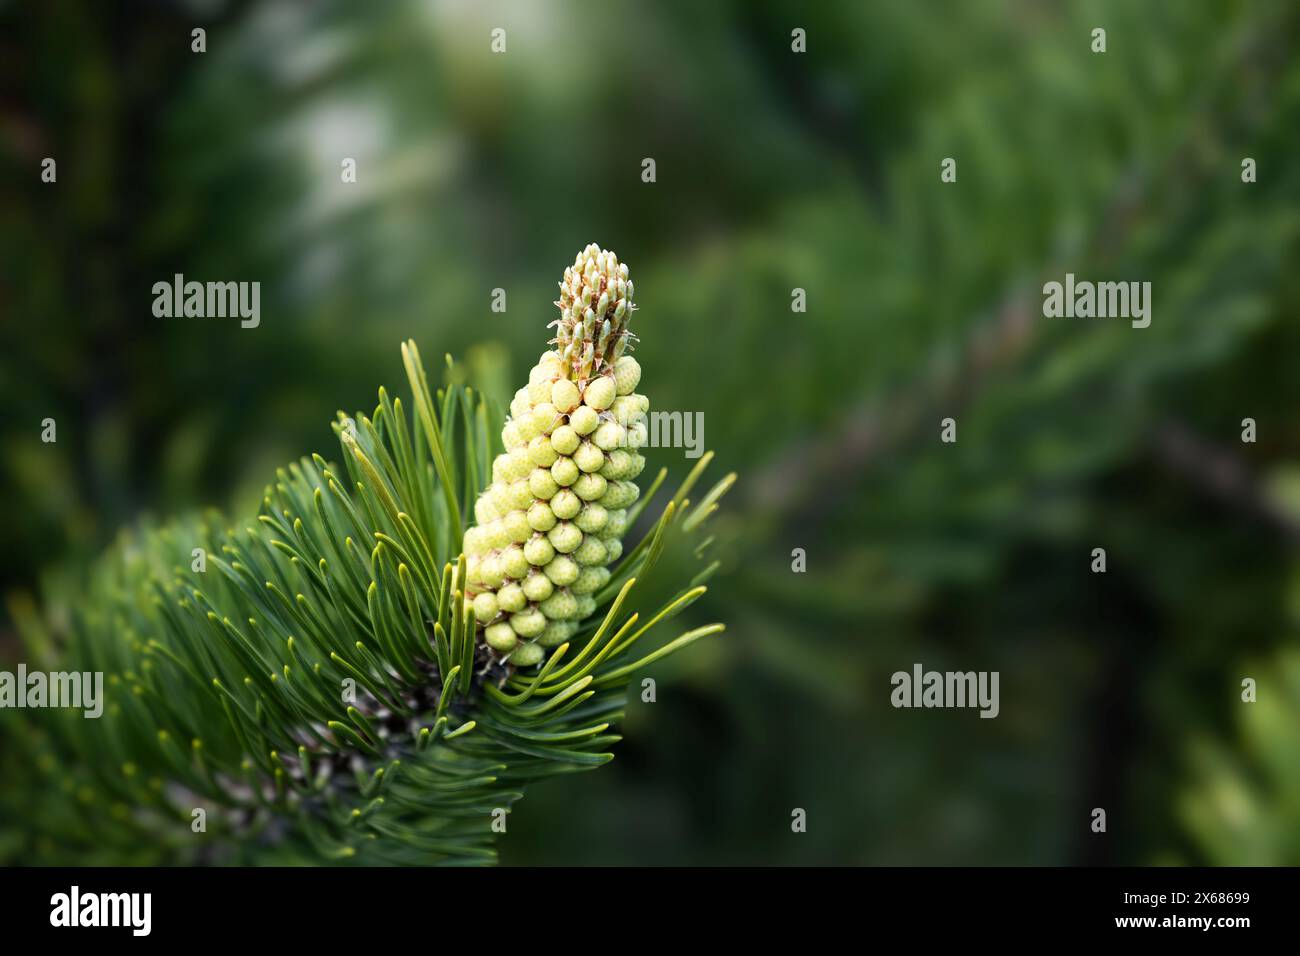 Blossom of Pinus mugo Turra. Male pollen producing strobili. New shoots in spring of dwarf mountain pine. Conifer cone. Cluster pollen-bearing male co Stock Photo